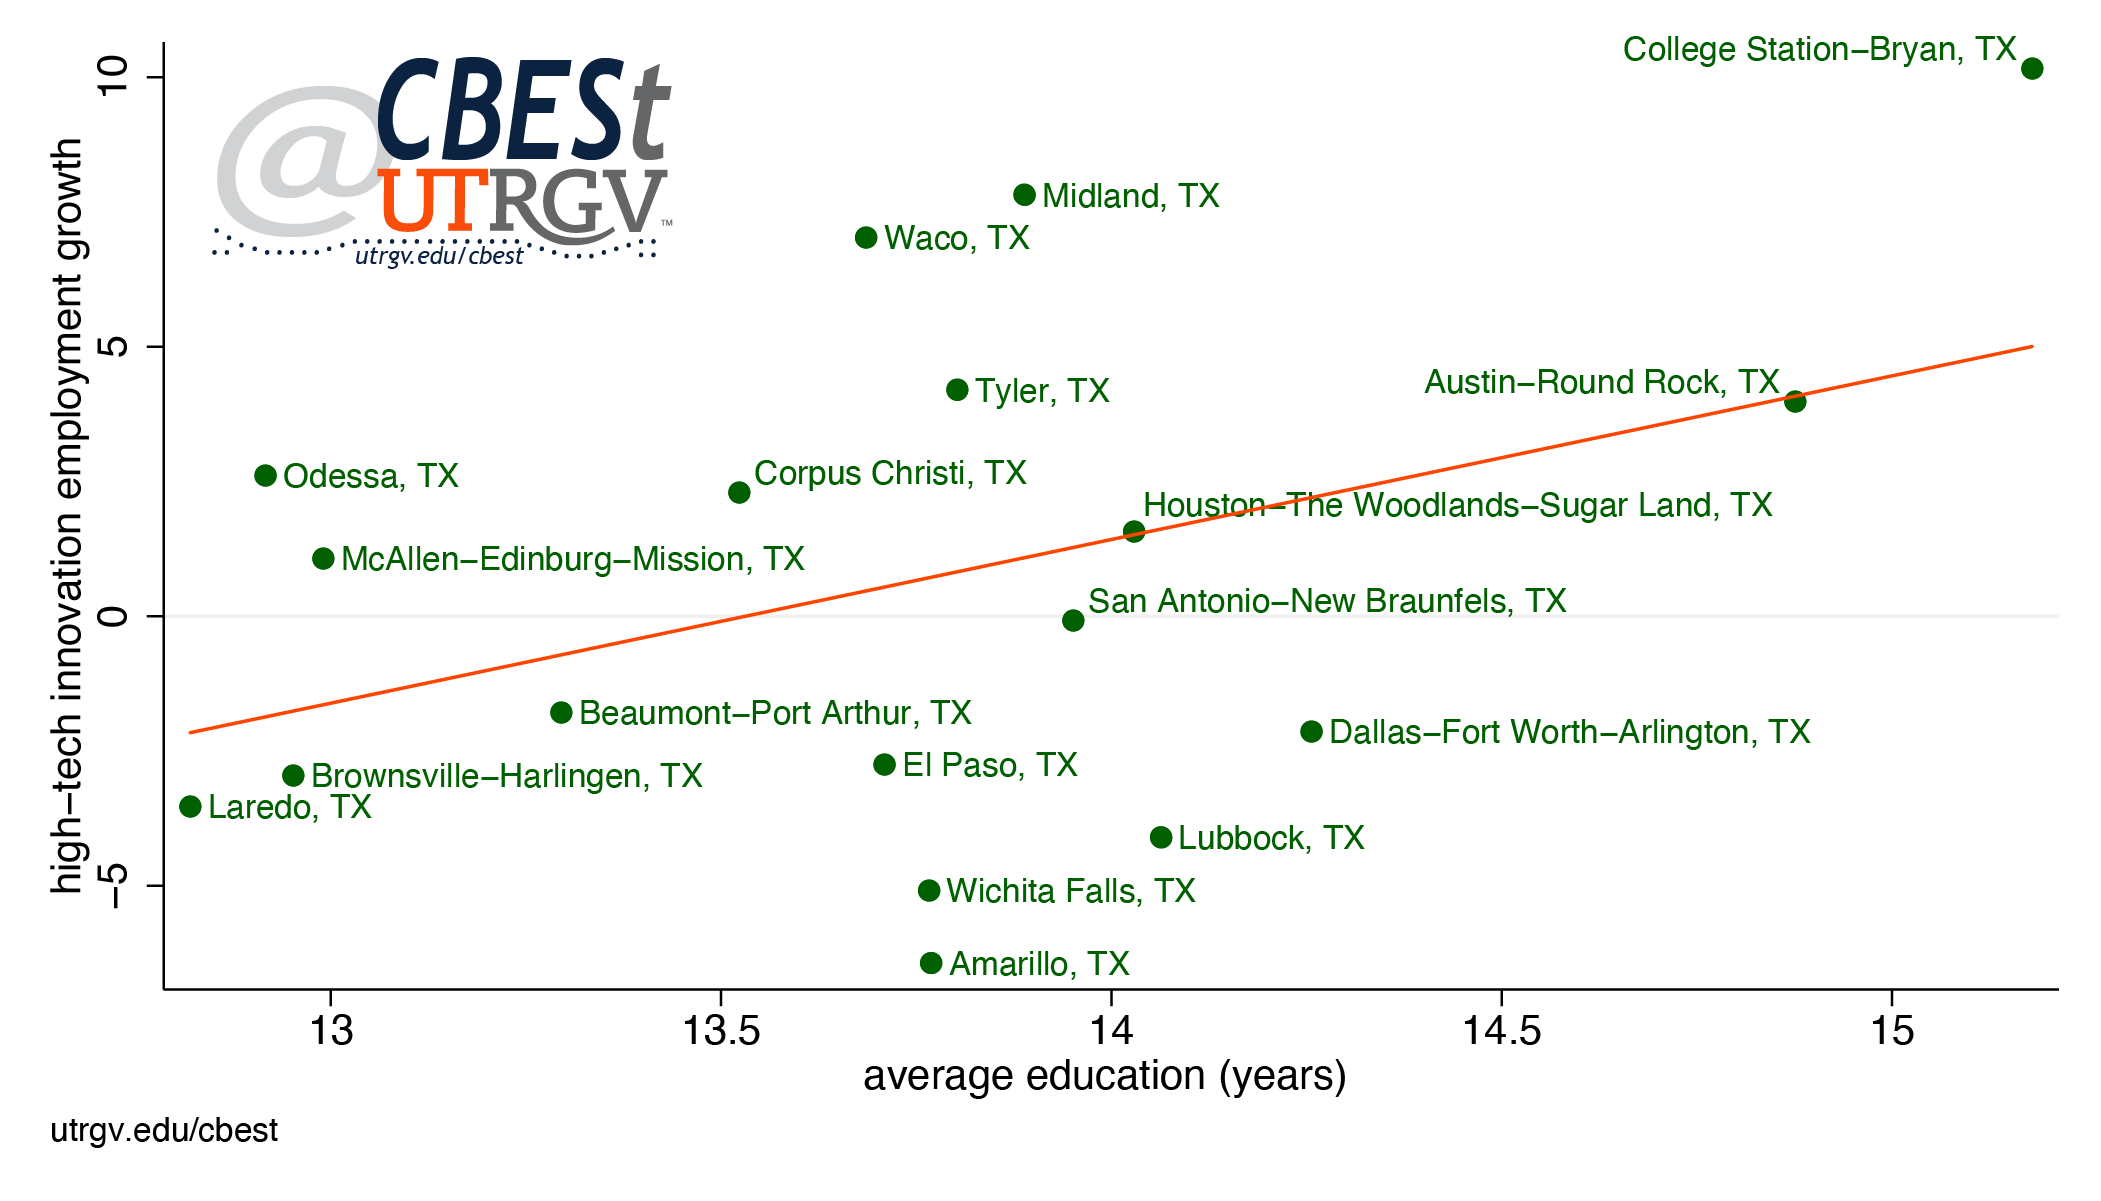 Correlation between annualized high-tech innovation sector employment growth and average education, 2005-2018 